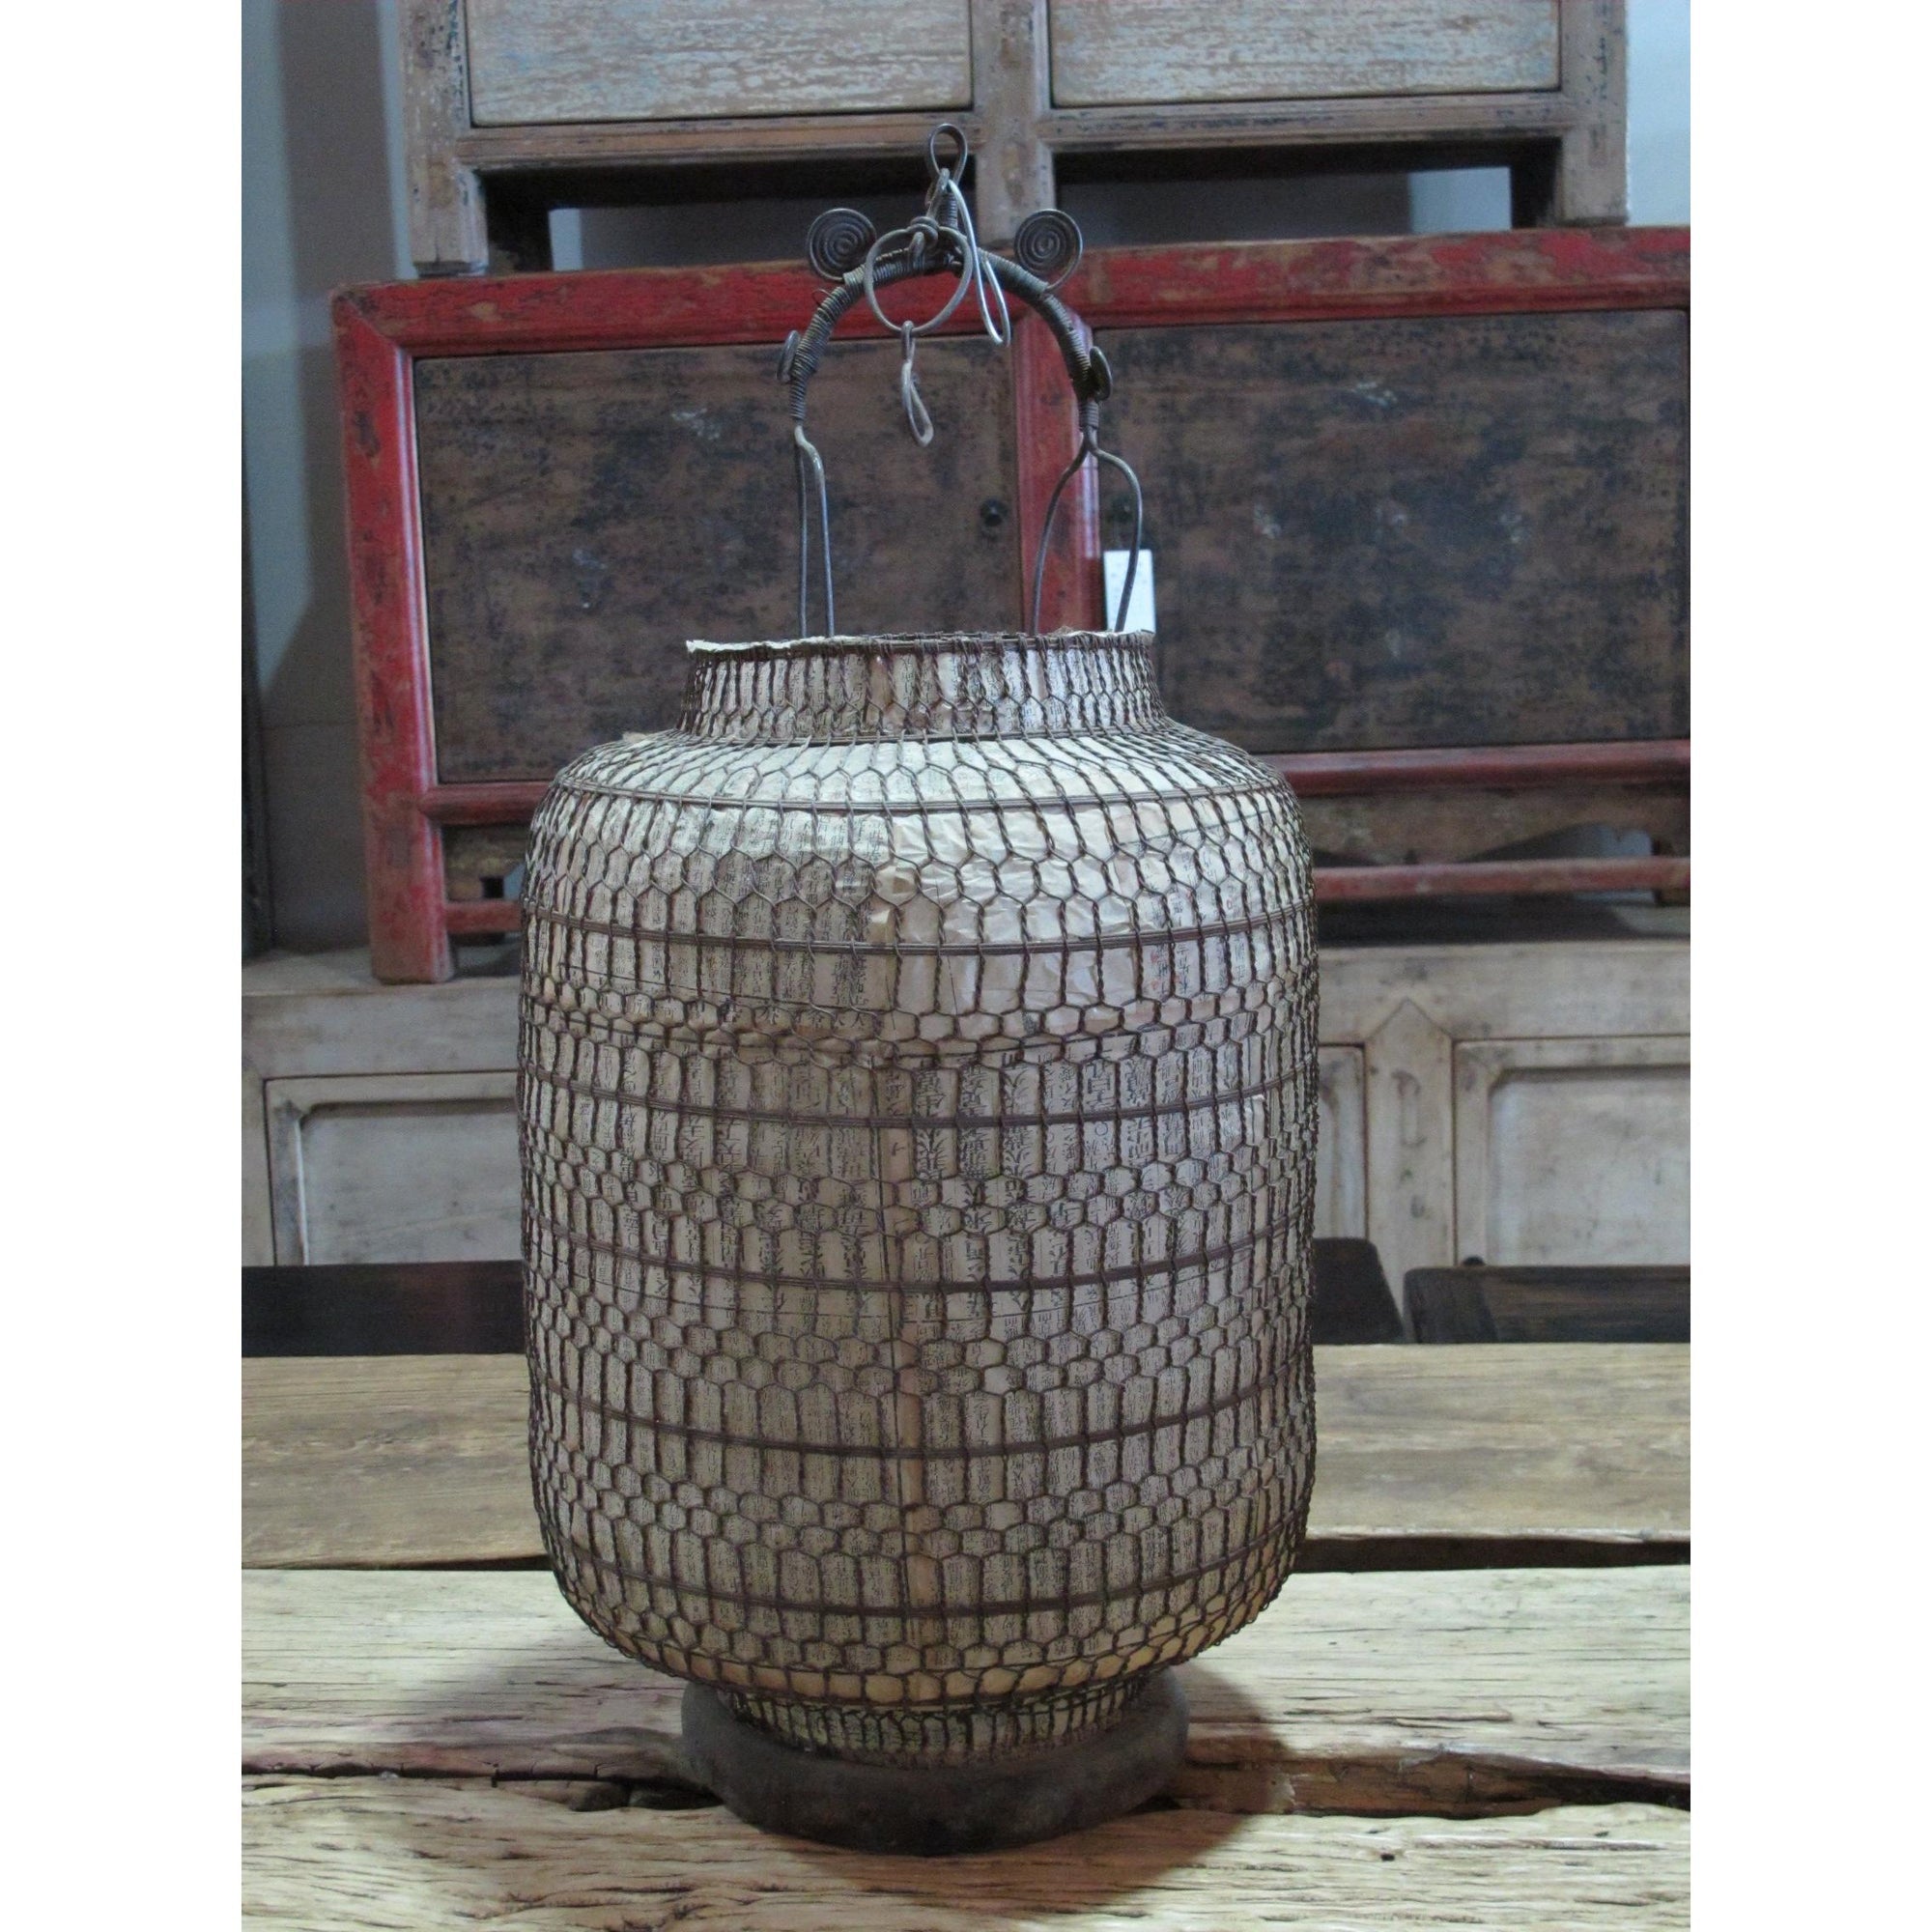 Old Chinese Wire Lantern From Shanxi - 85Yrs Old | Indigo Oriental Antiques